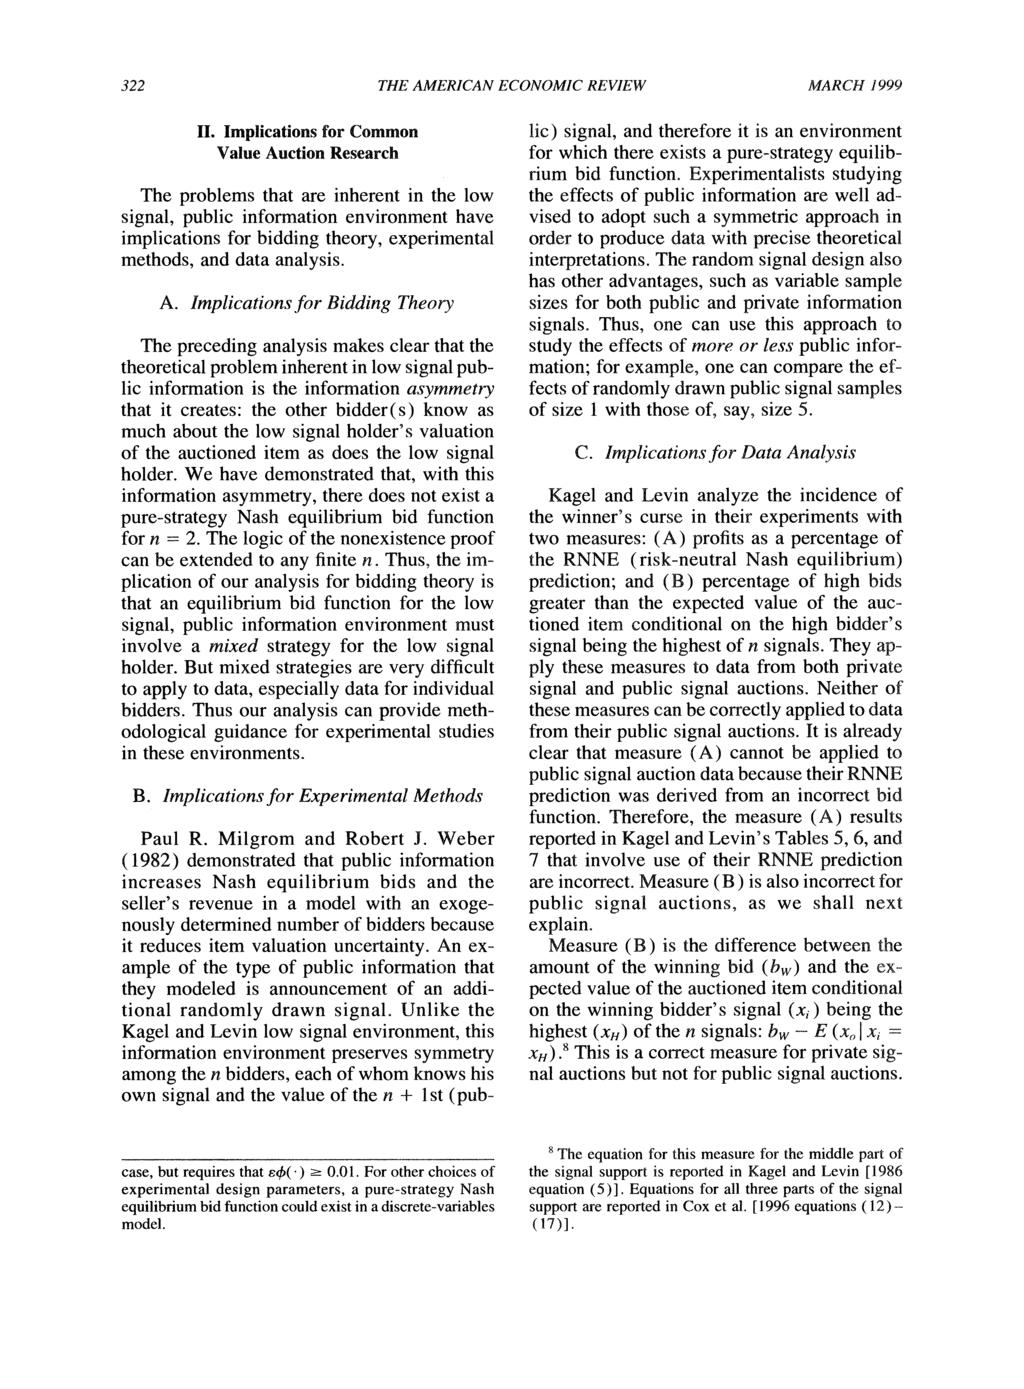 322 THE AMERICAN ECONOMIC REVIEW MARCH 1999 IIe Implications for Common Value Auction Research The problems that are inherent in the low signal, public information environment have implications for